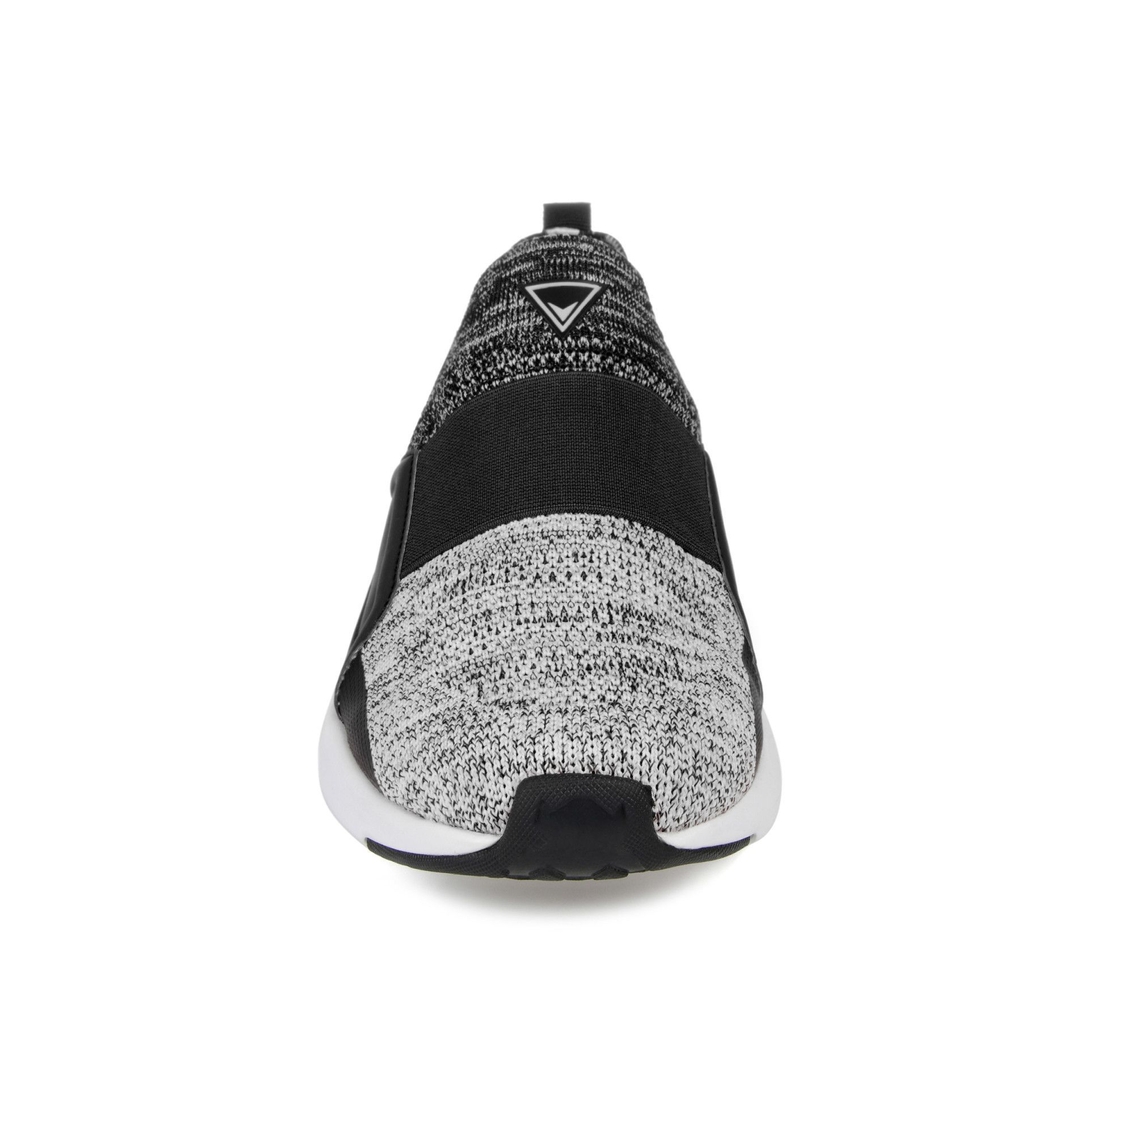 Vance Co. Cannon Casual Slip-on Knit Walking Sneaker - Image 2 of 4